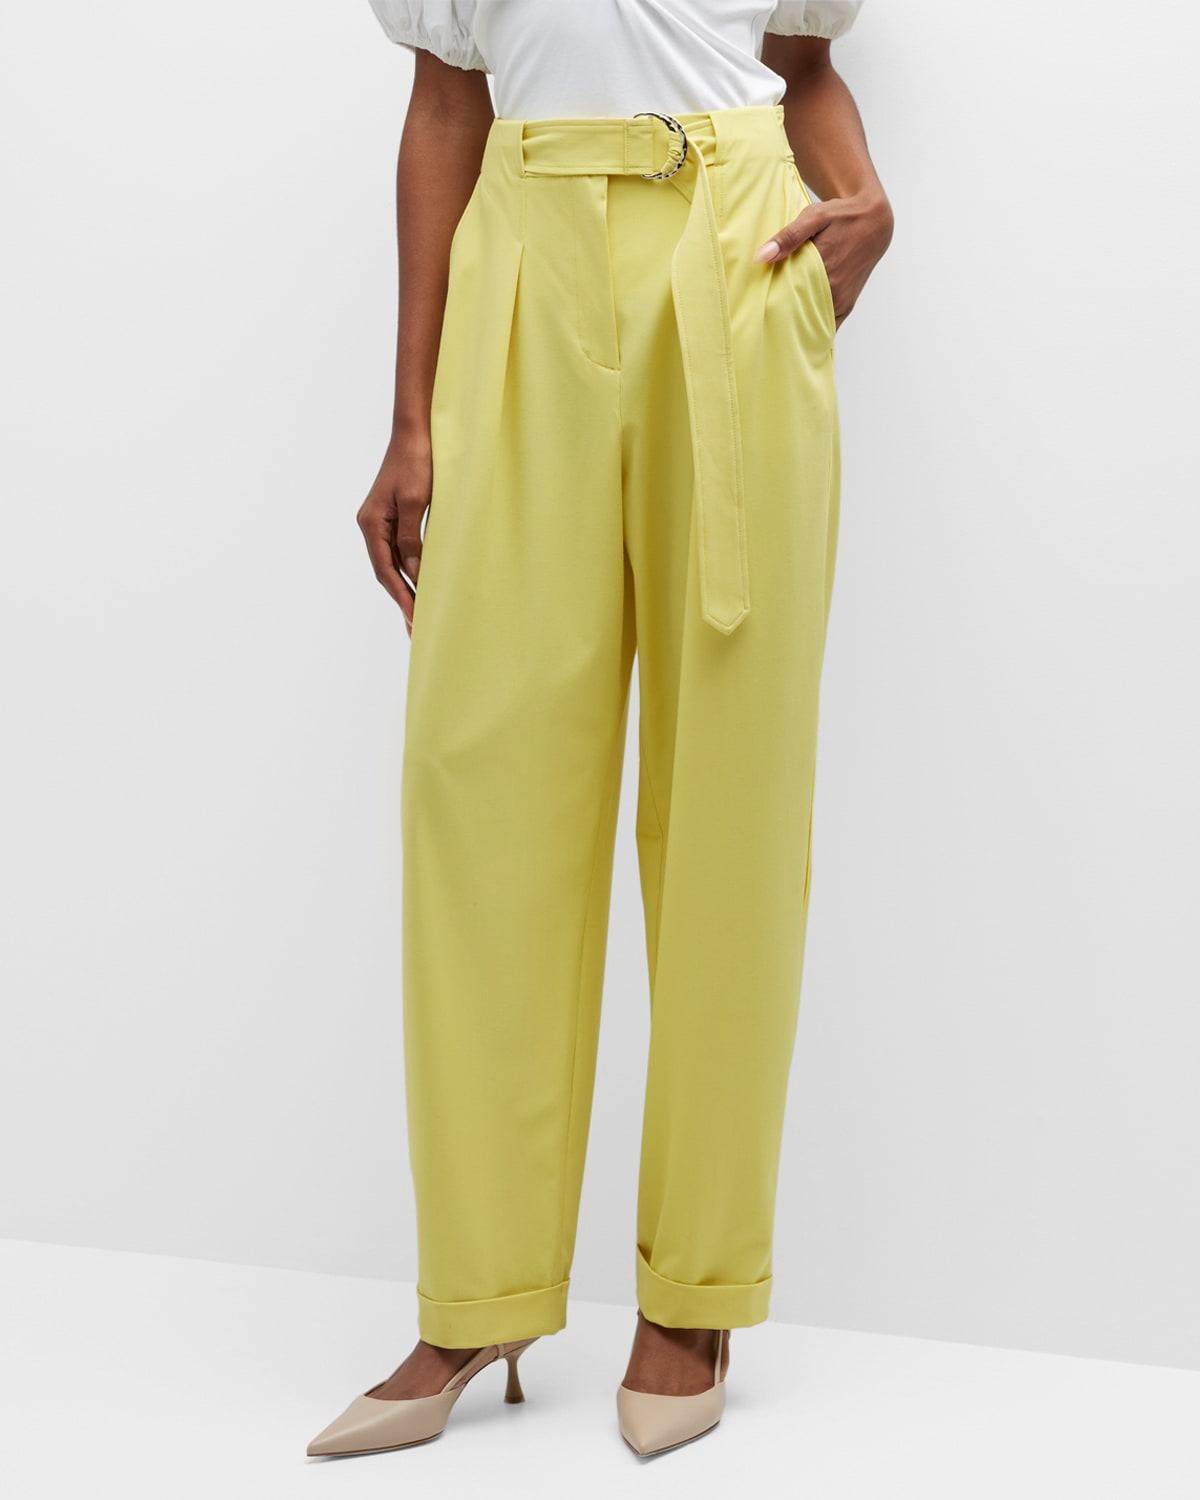 Tanya Taylor Tyler Belted Pleated Twill Pants in Yellow | Lyst